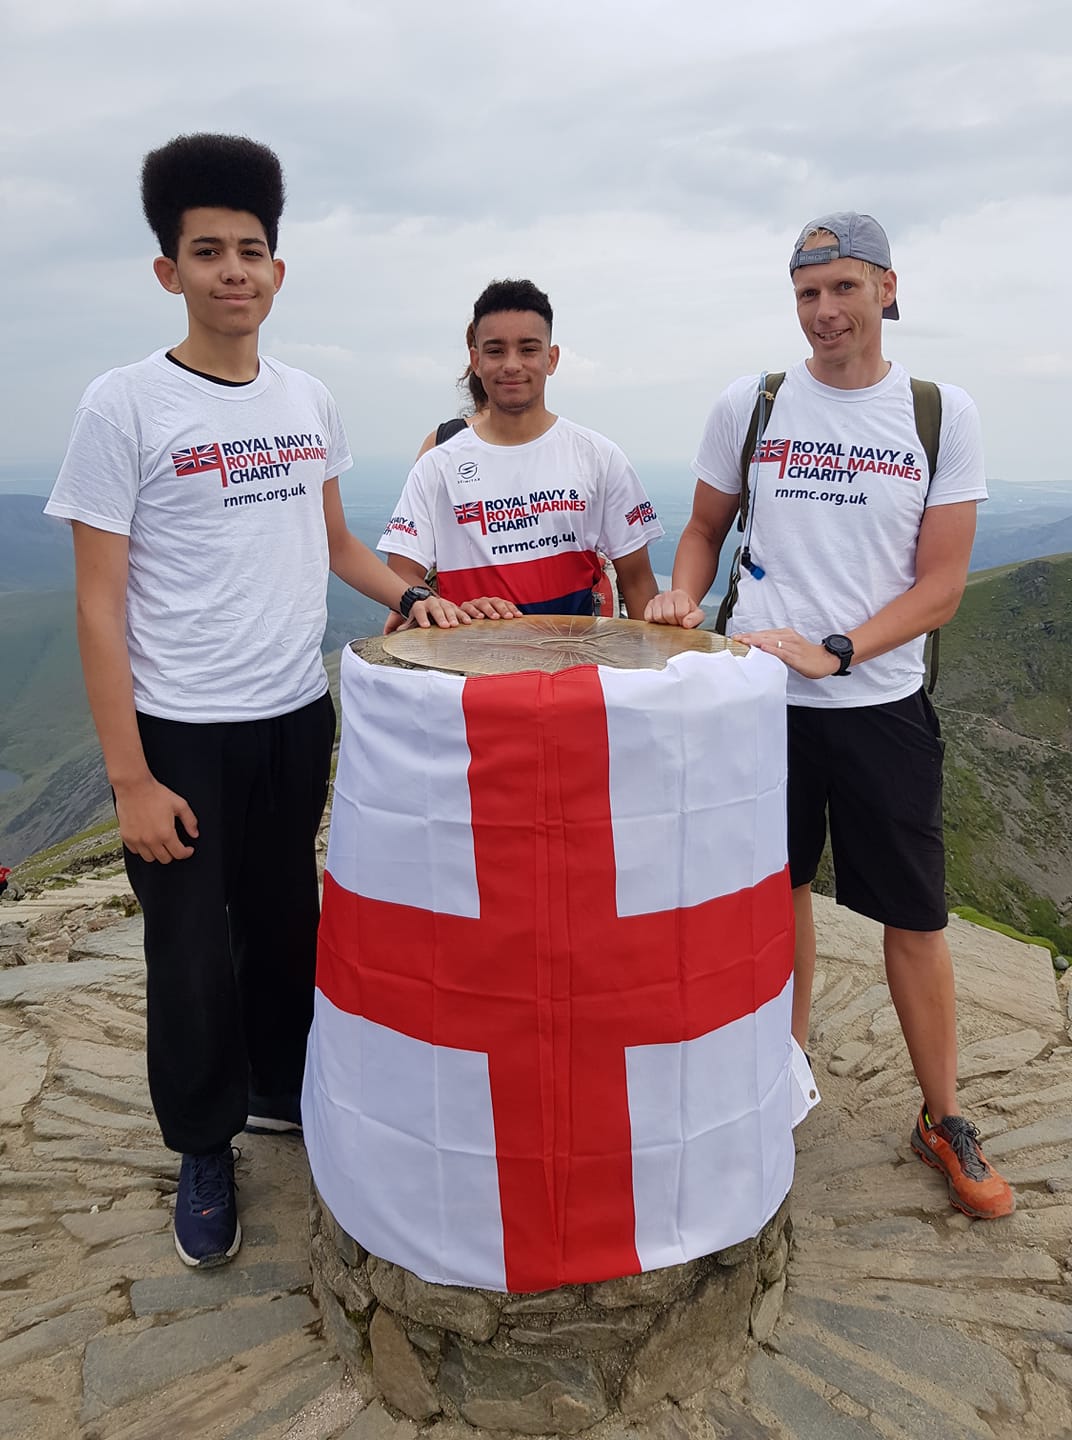 AB Dhillon Walters Climbed Mount Snowdon 18 Times For 18th Birthday